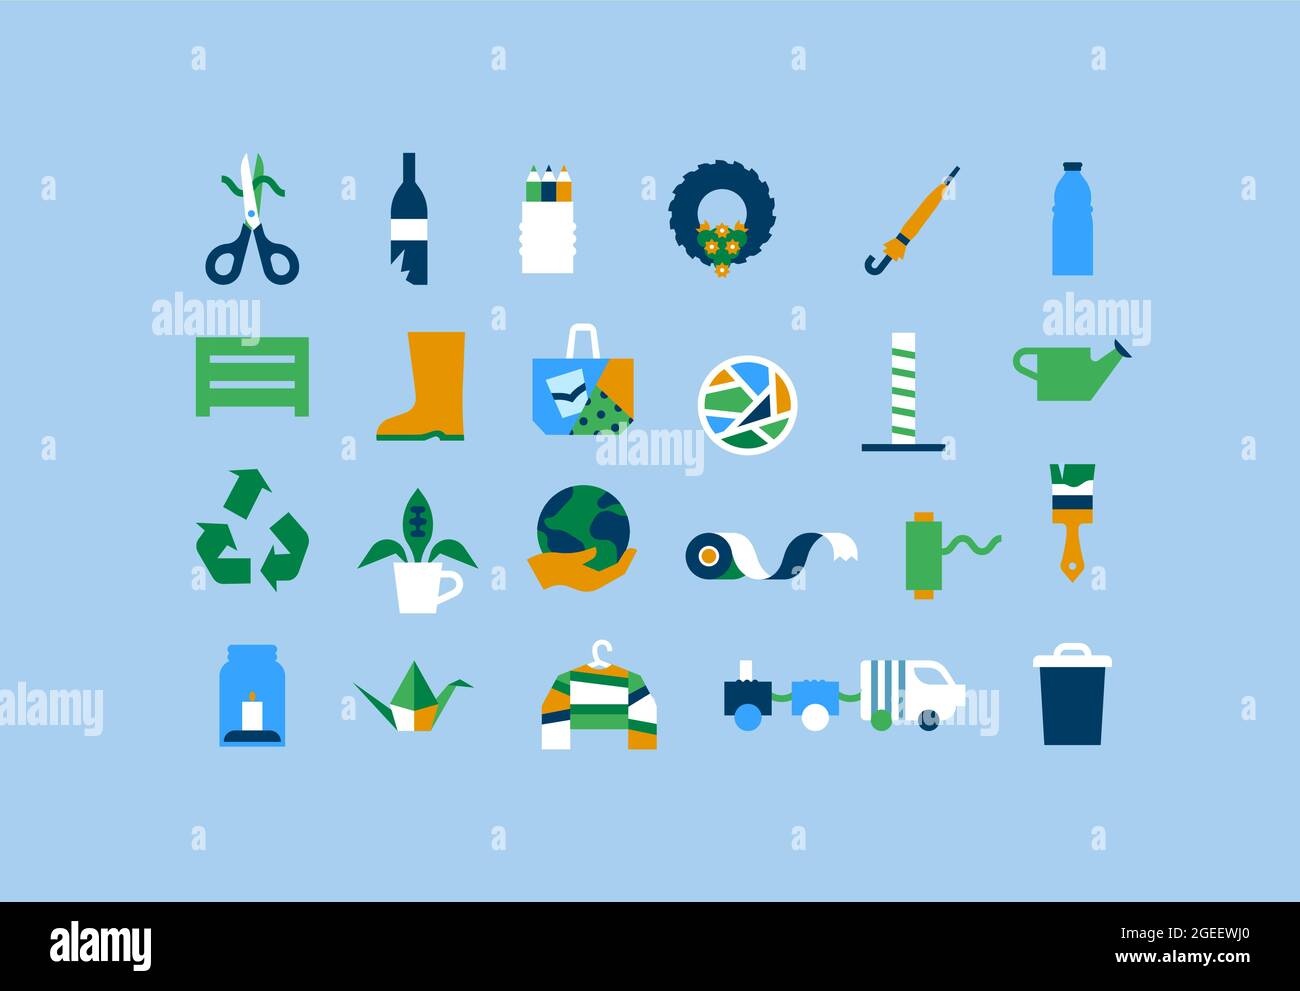 Upcycle eco friendly cartoon icon set. Modern flat geometric sign collection with recycled DIY home objects, green planet and arrow symbol on isolated Stock Vector